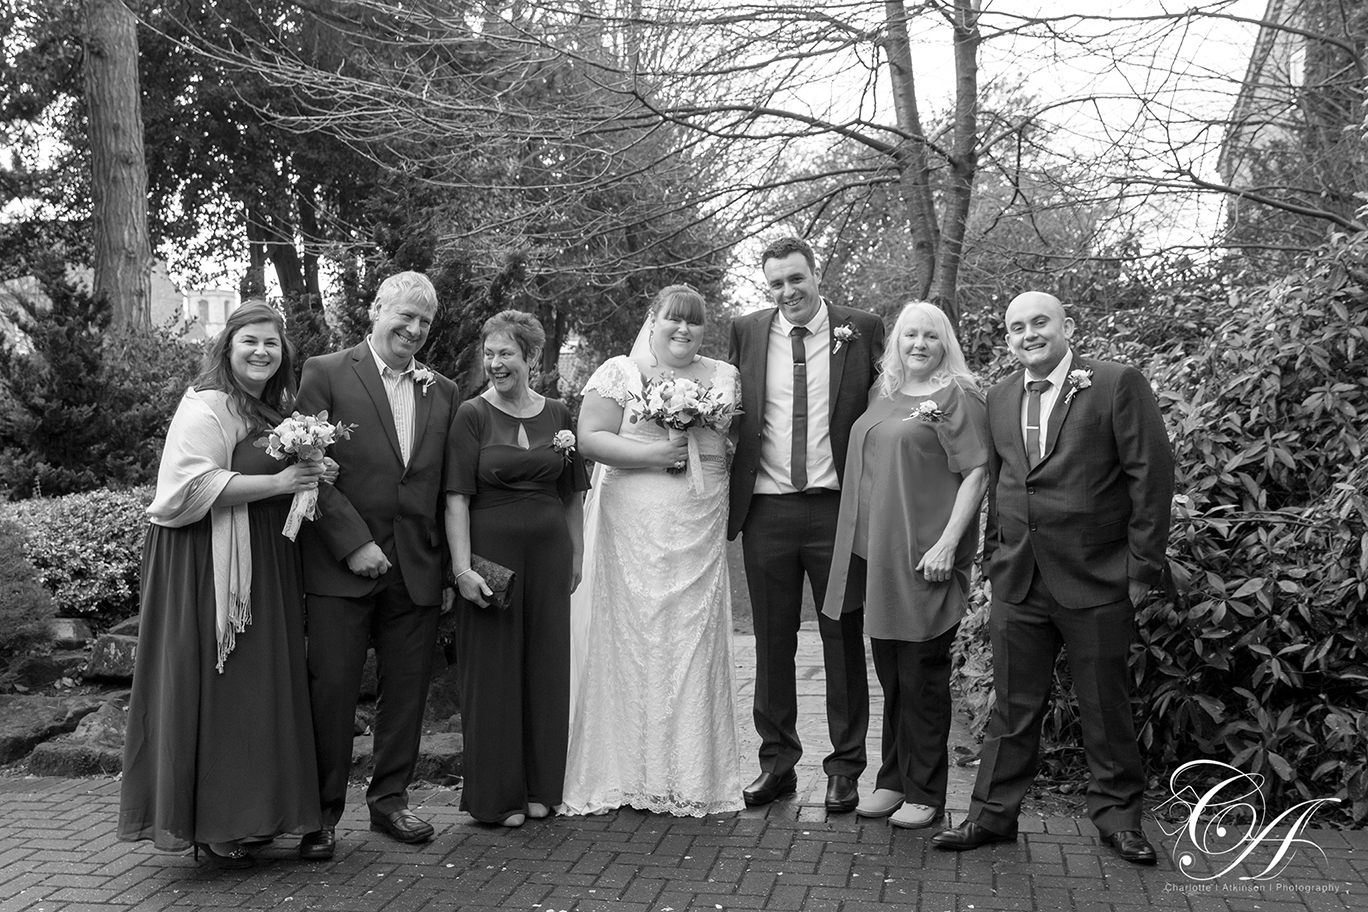 Bridal party group wedding photo in the gardens at the York registry office